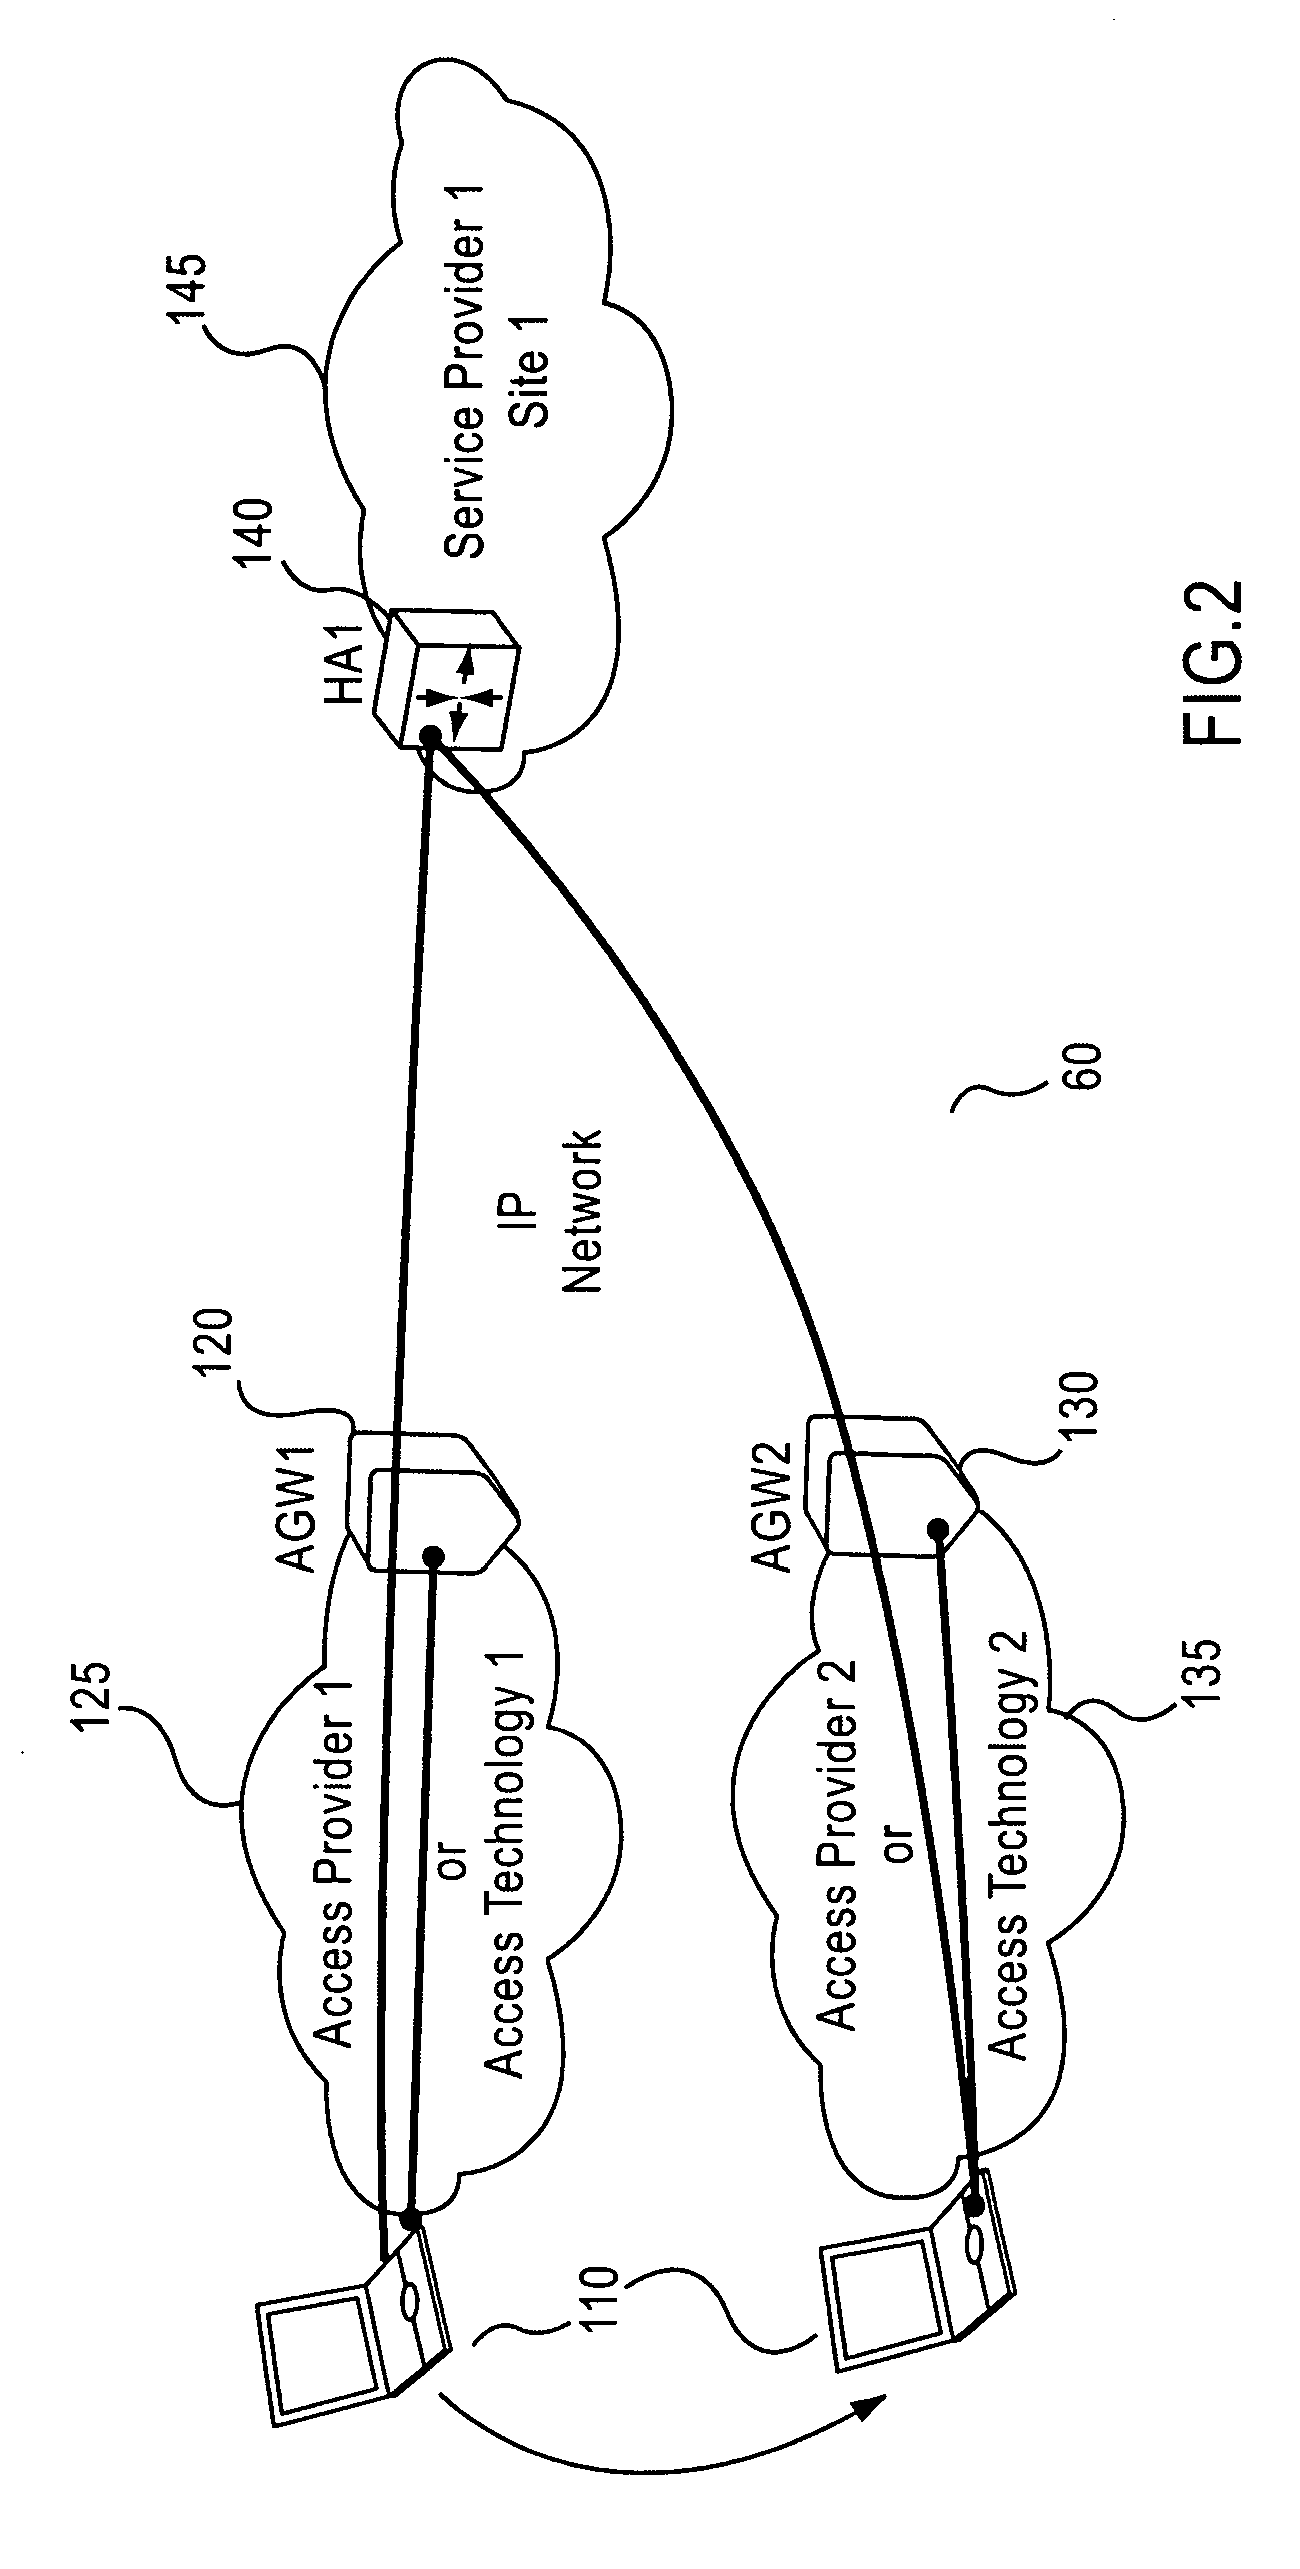 Selection of an access layer termination node in a multi-access network environment